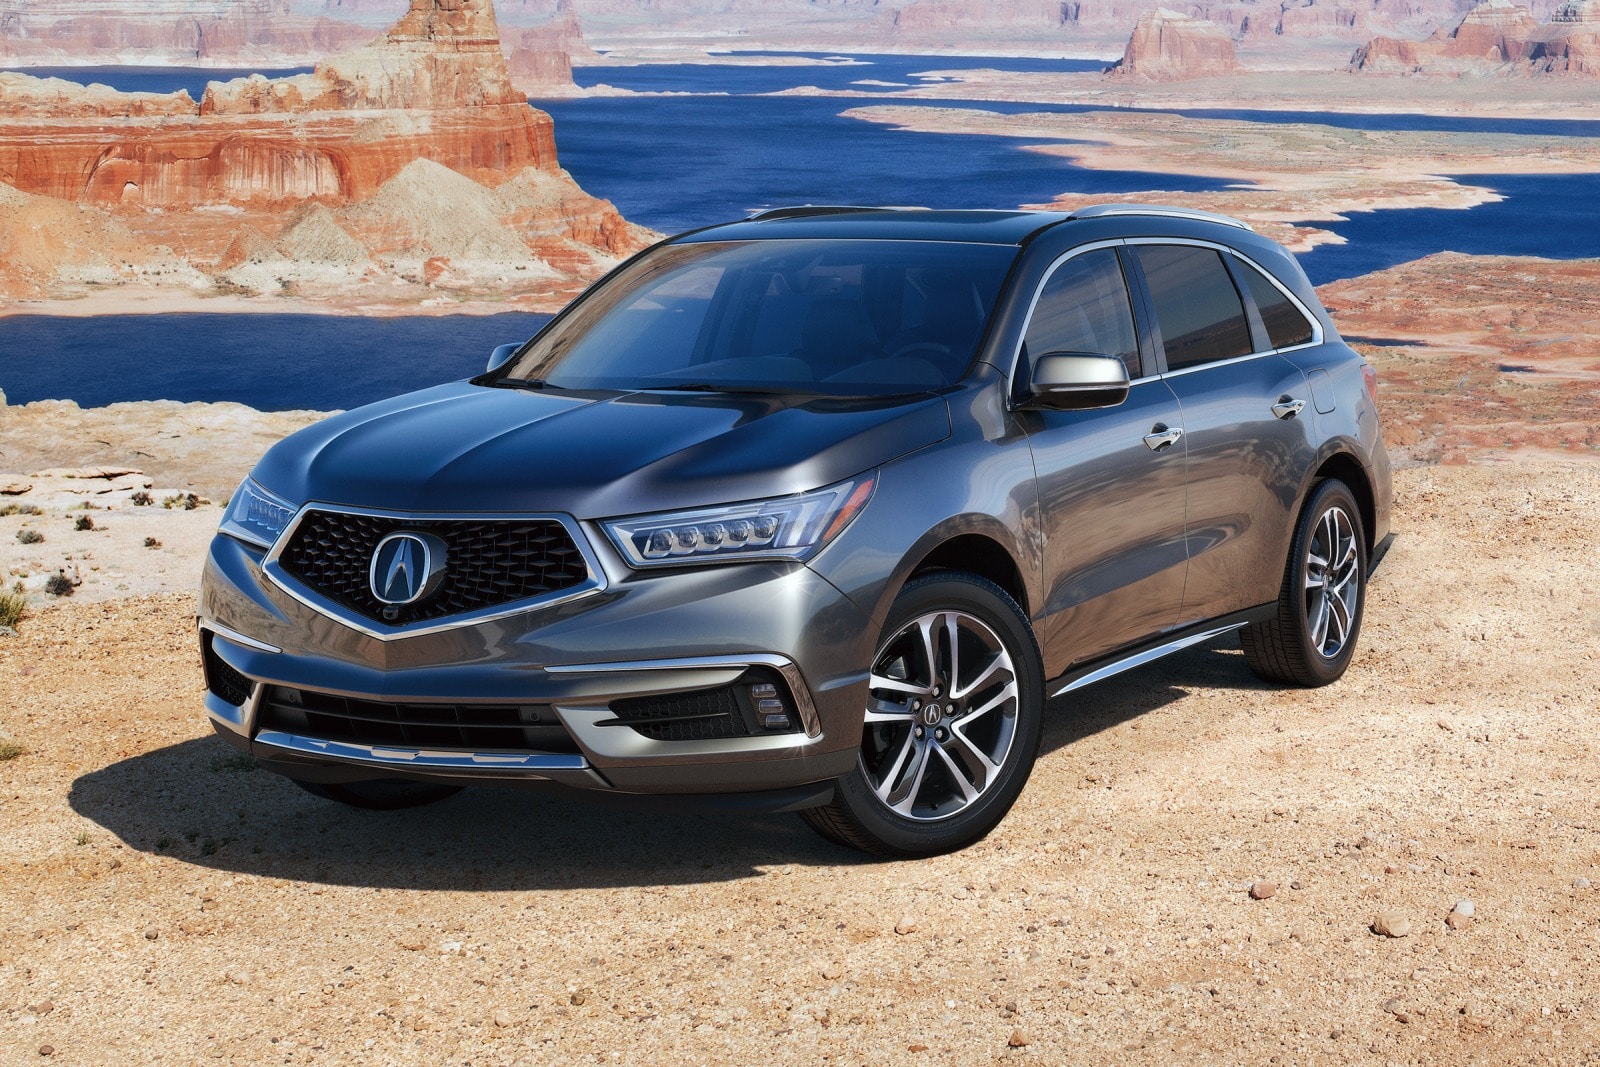 2018 Acura MDX Review & Ratings | Edmunds